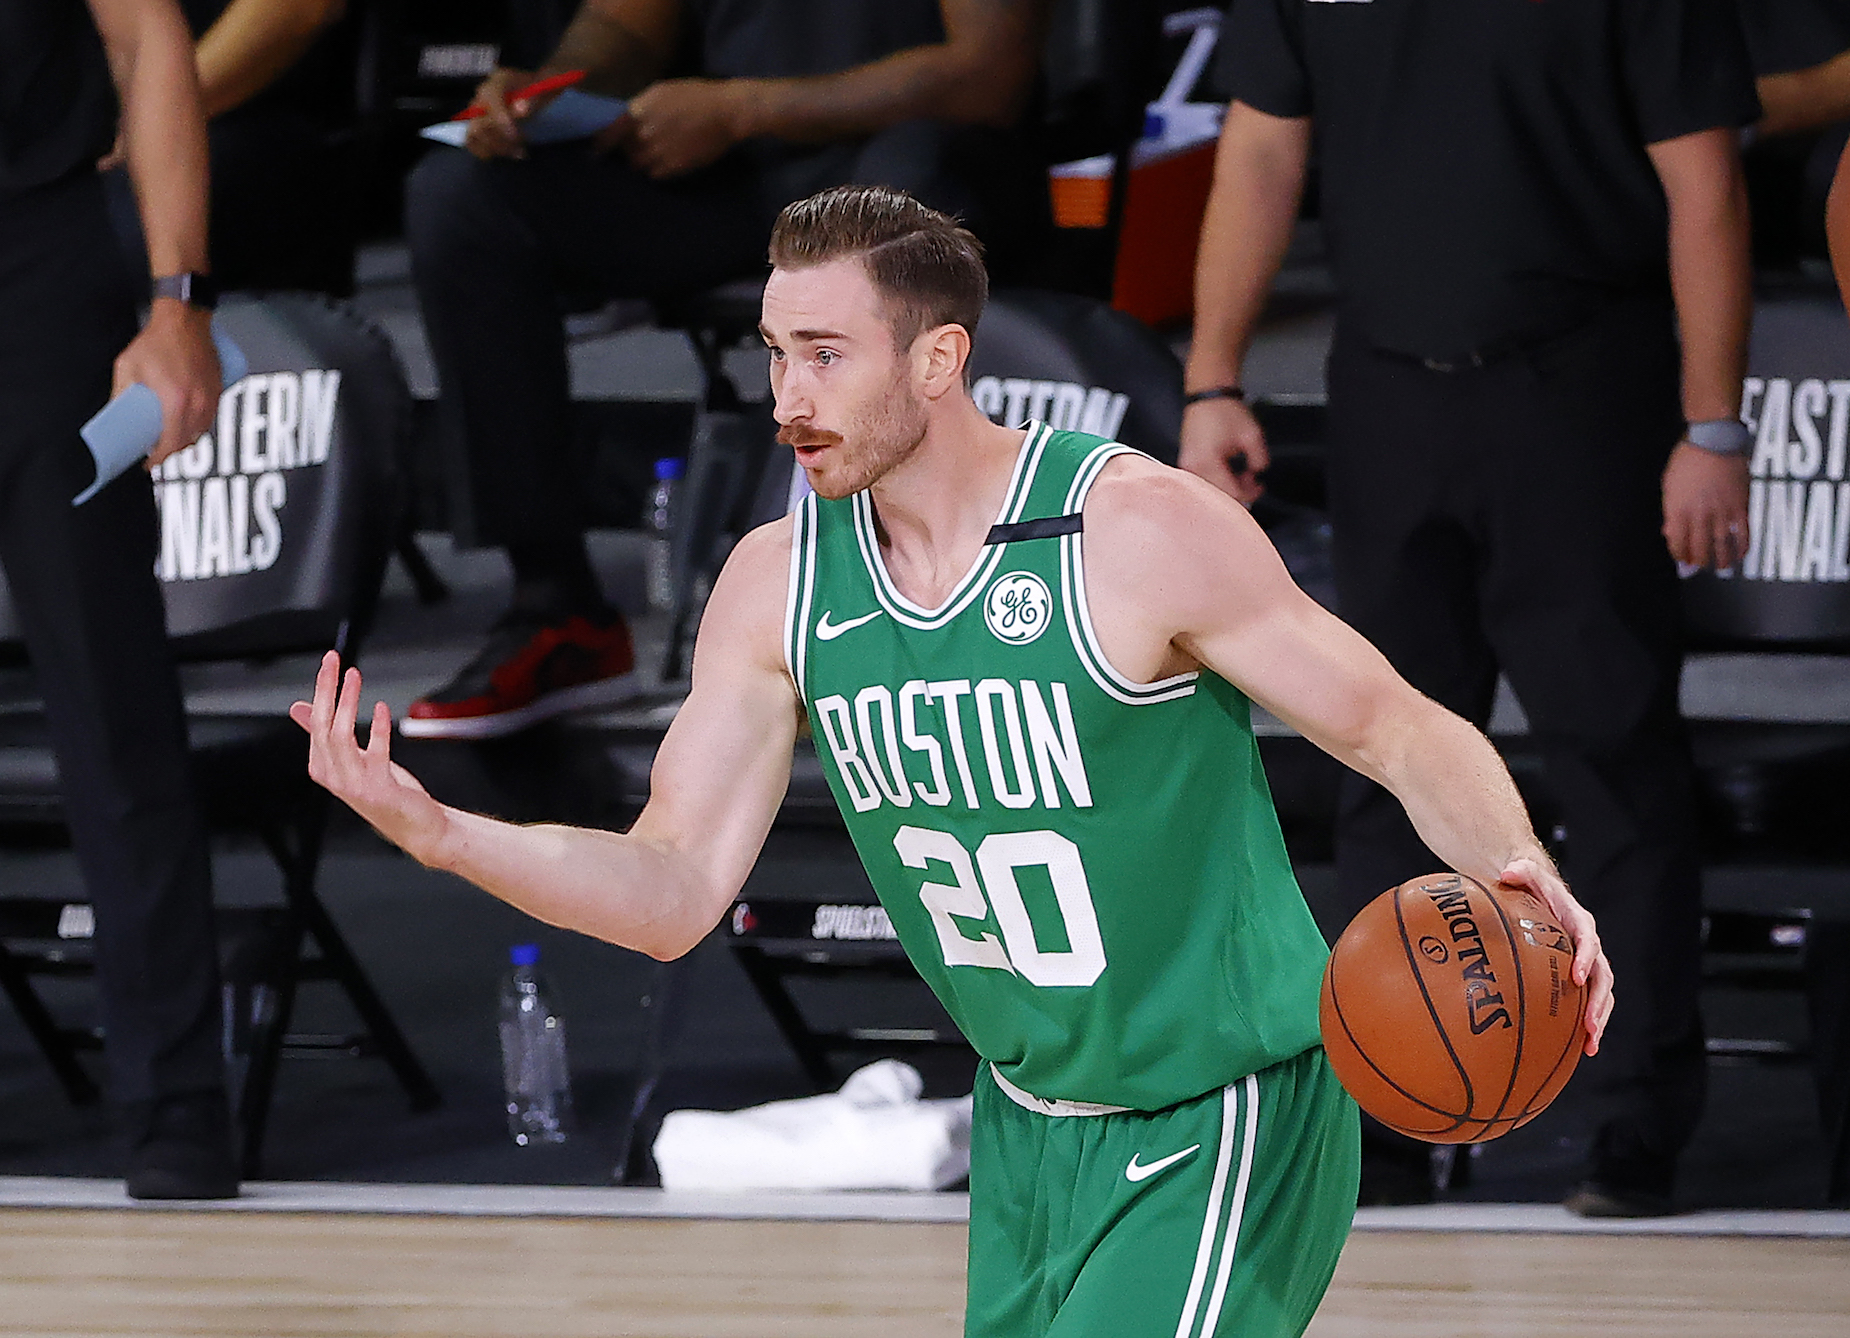 Gordon Hayward's revenge tour is saving MJ's image as an owner - Basketball  Network - Your daily dose of basketball